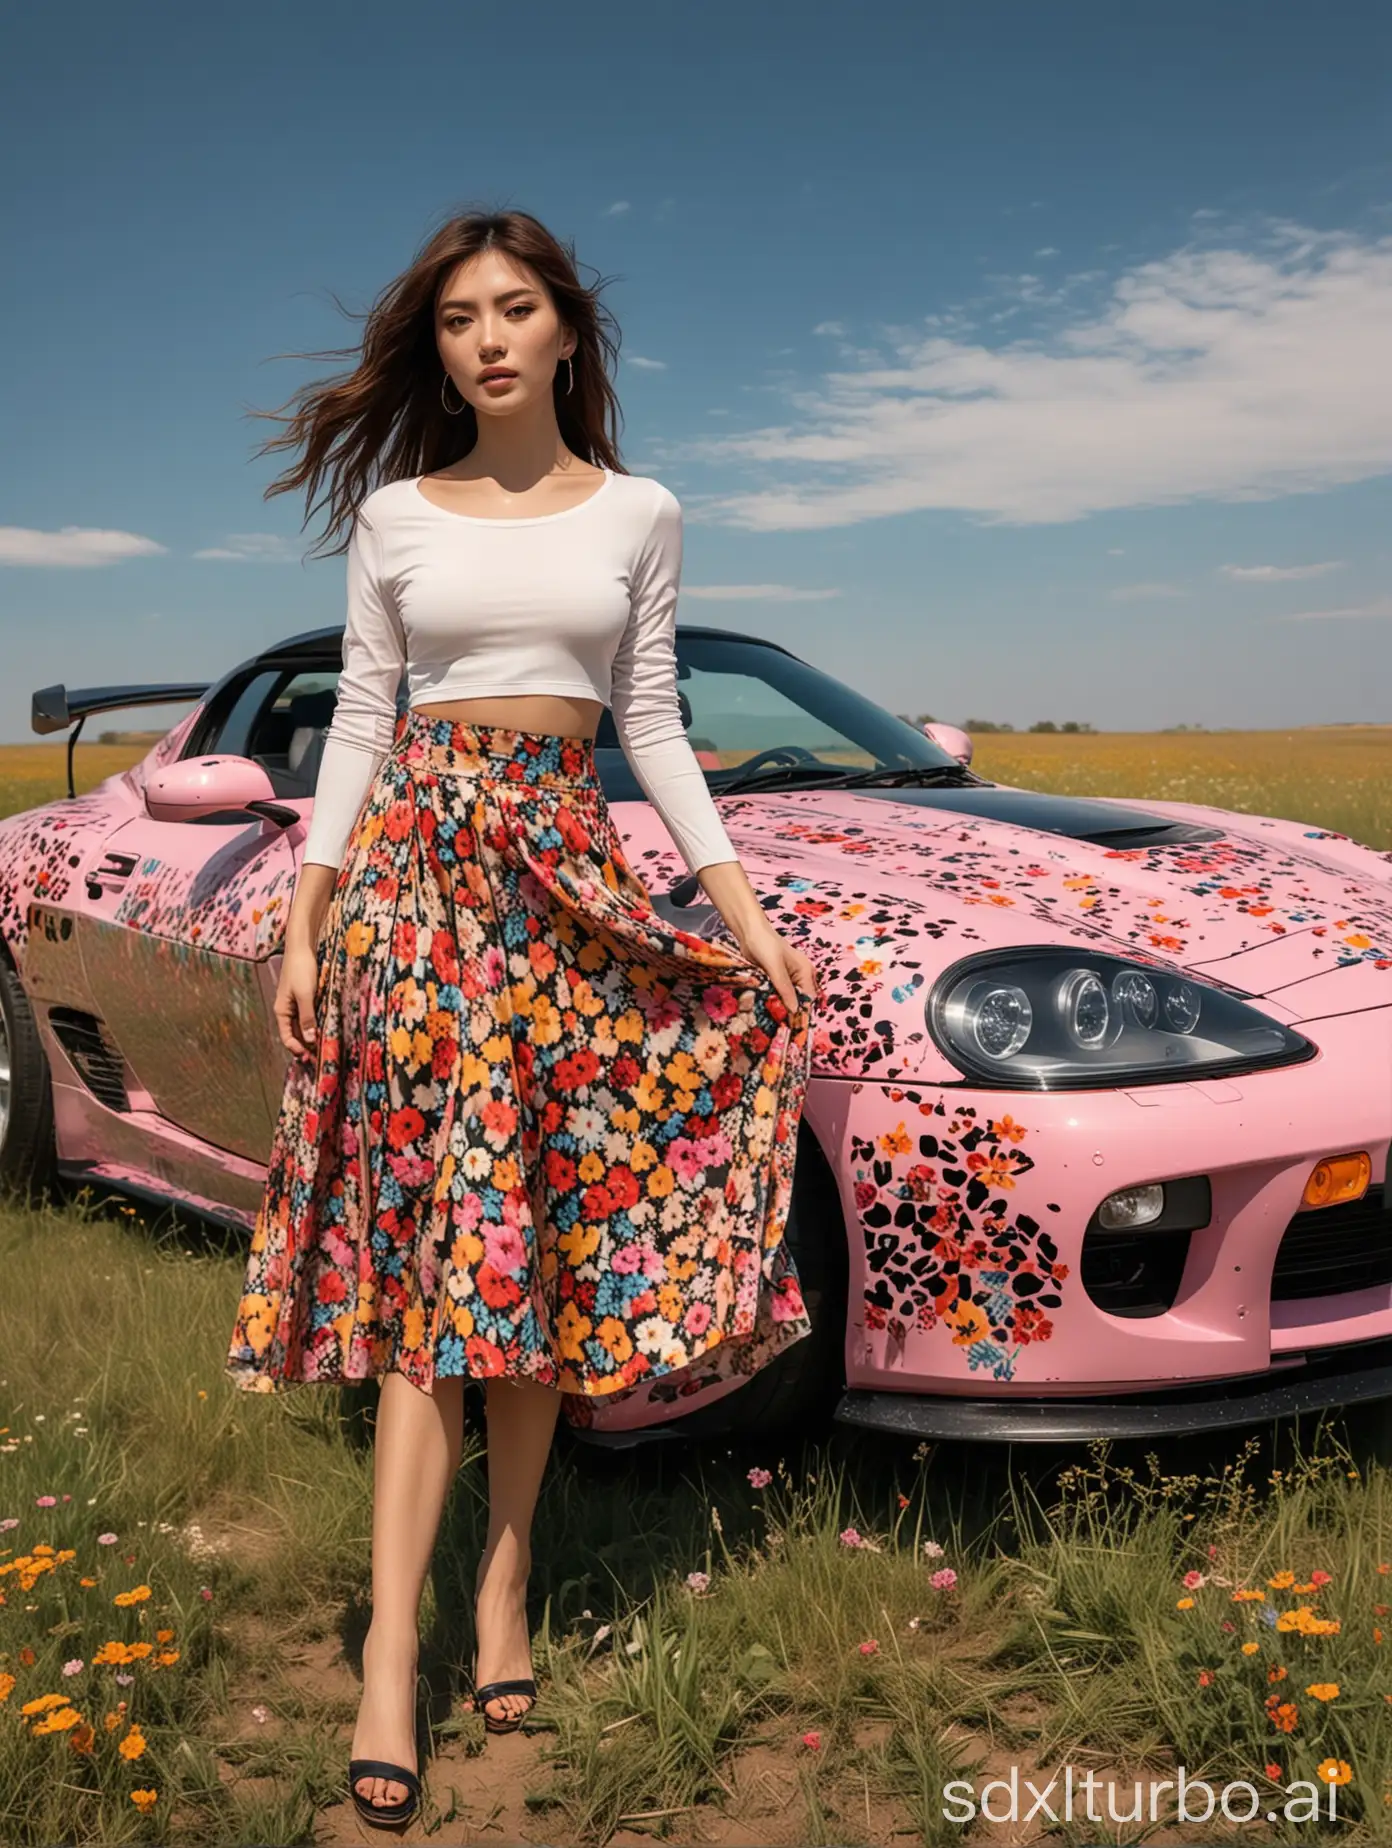 Oriental-Modern-Fashion-Woman-and-Flower-Leopard-Pose-with-HighEnd-Sports-Car-on-Colorful-Grassland